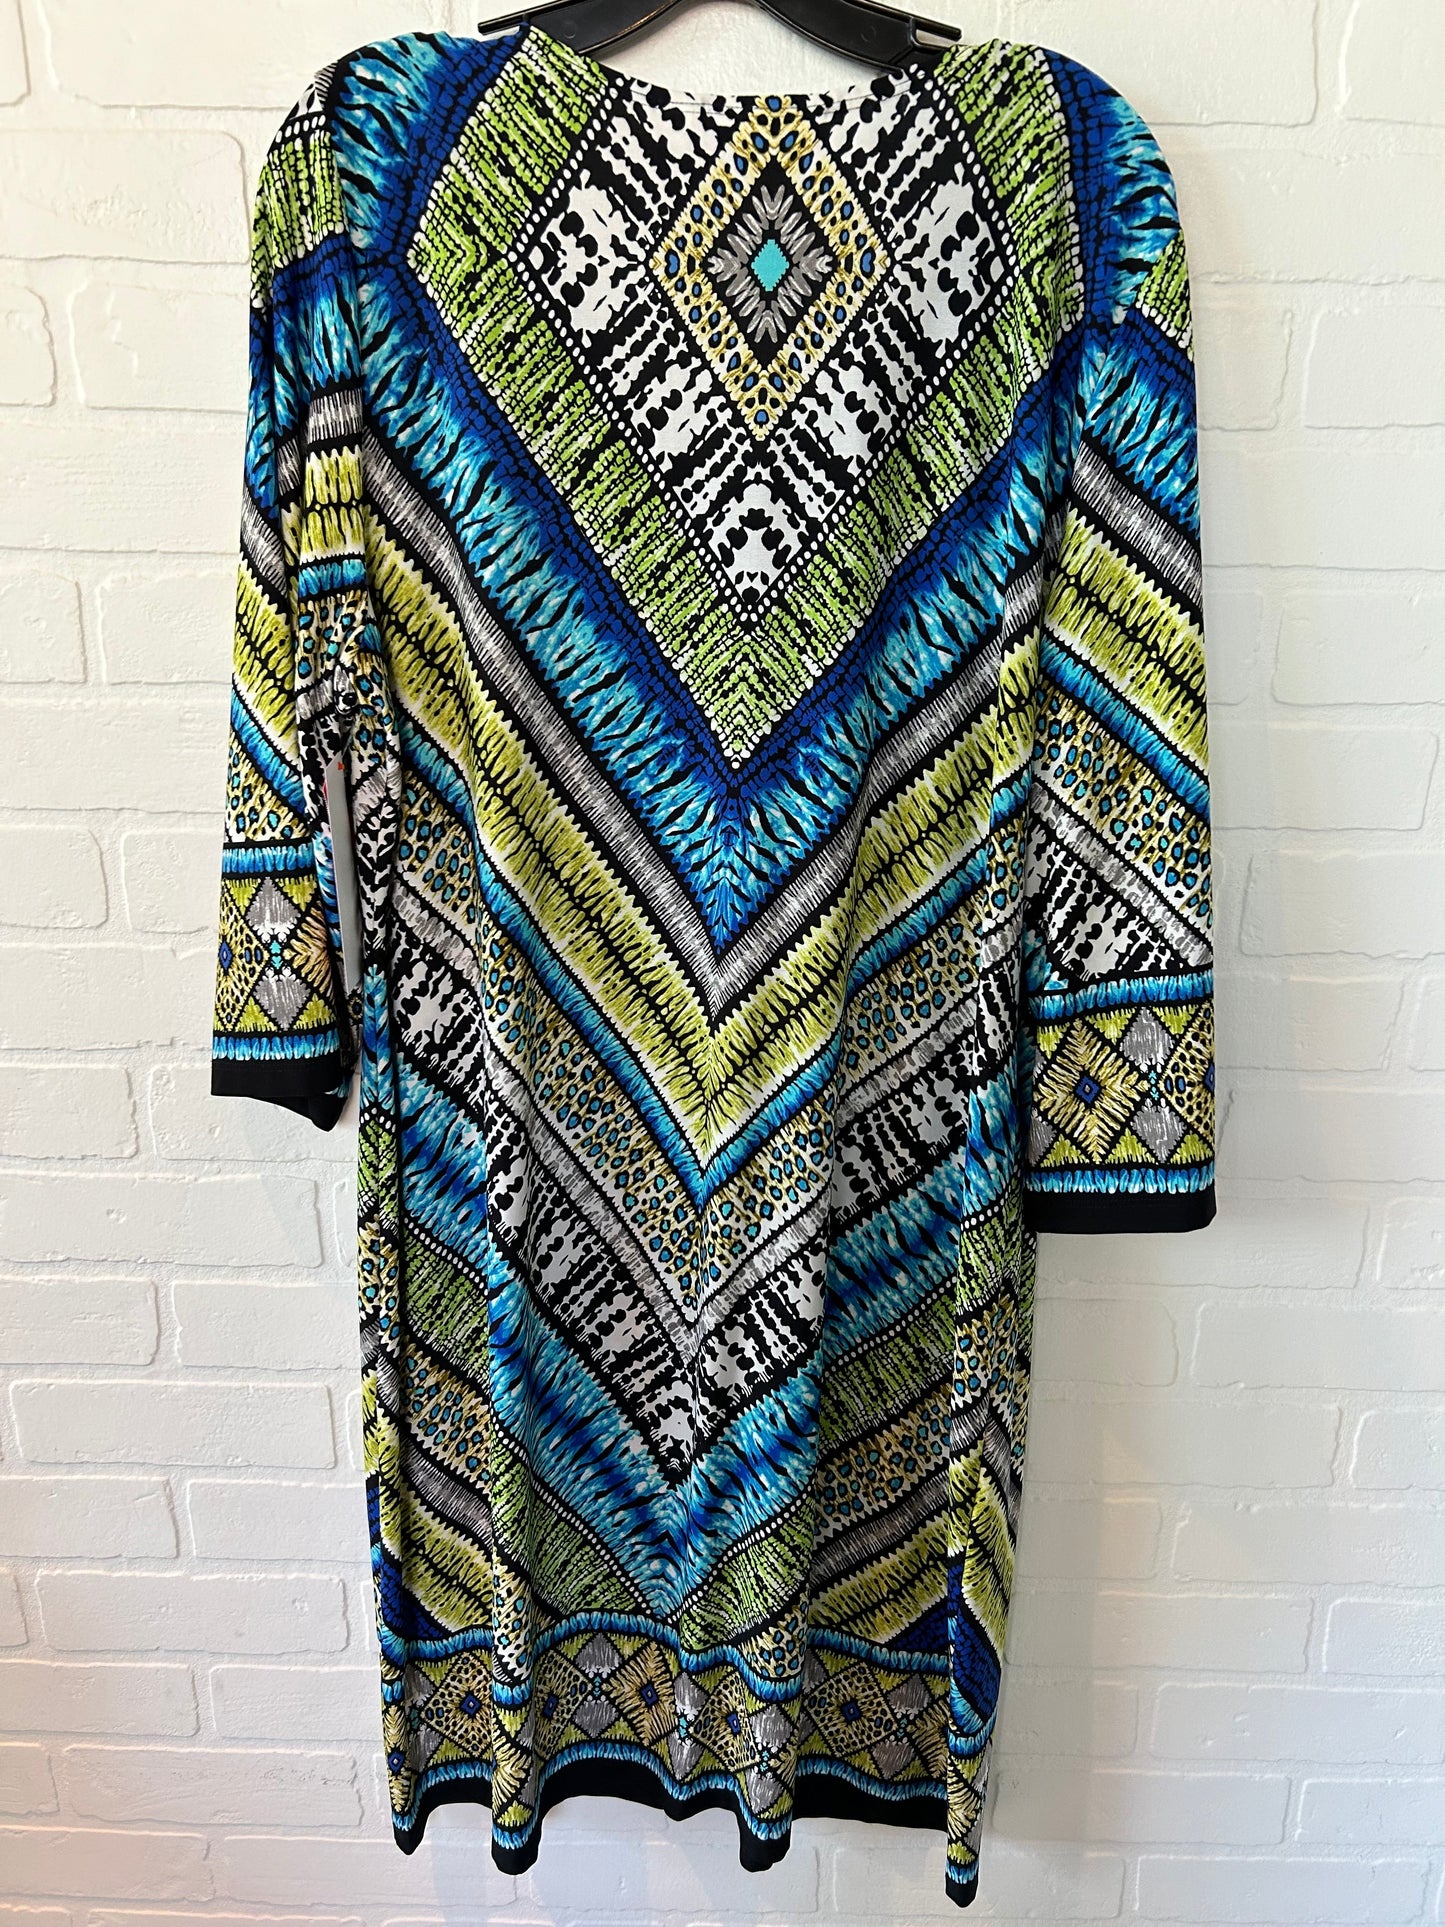 Multi-colored Dress Casual Short Chicos, Size Xl